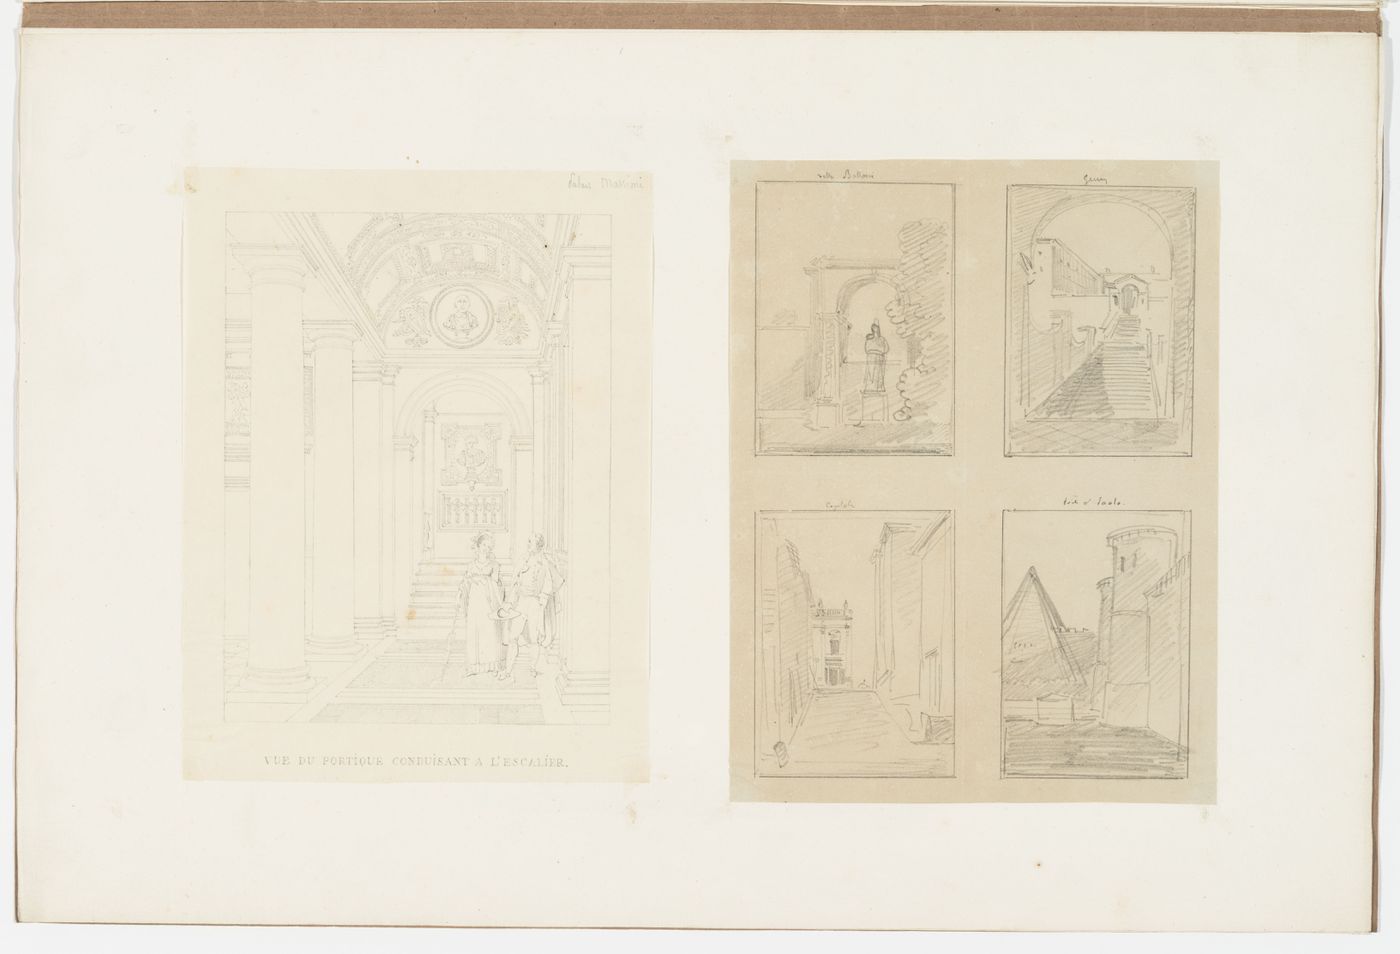 View of the portico and stairs, Palazzo Massimi, Rome; Preparatory sketches for views of Villa Balloni [?], the Piazza del Campidoglio, the pyramid of Caius Cestius, and an unidentified subject, Rome